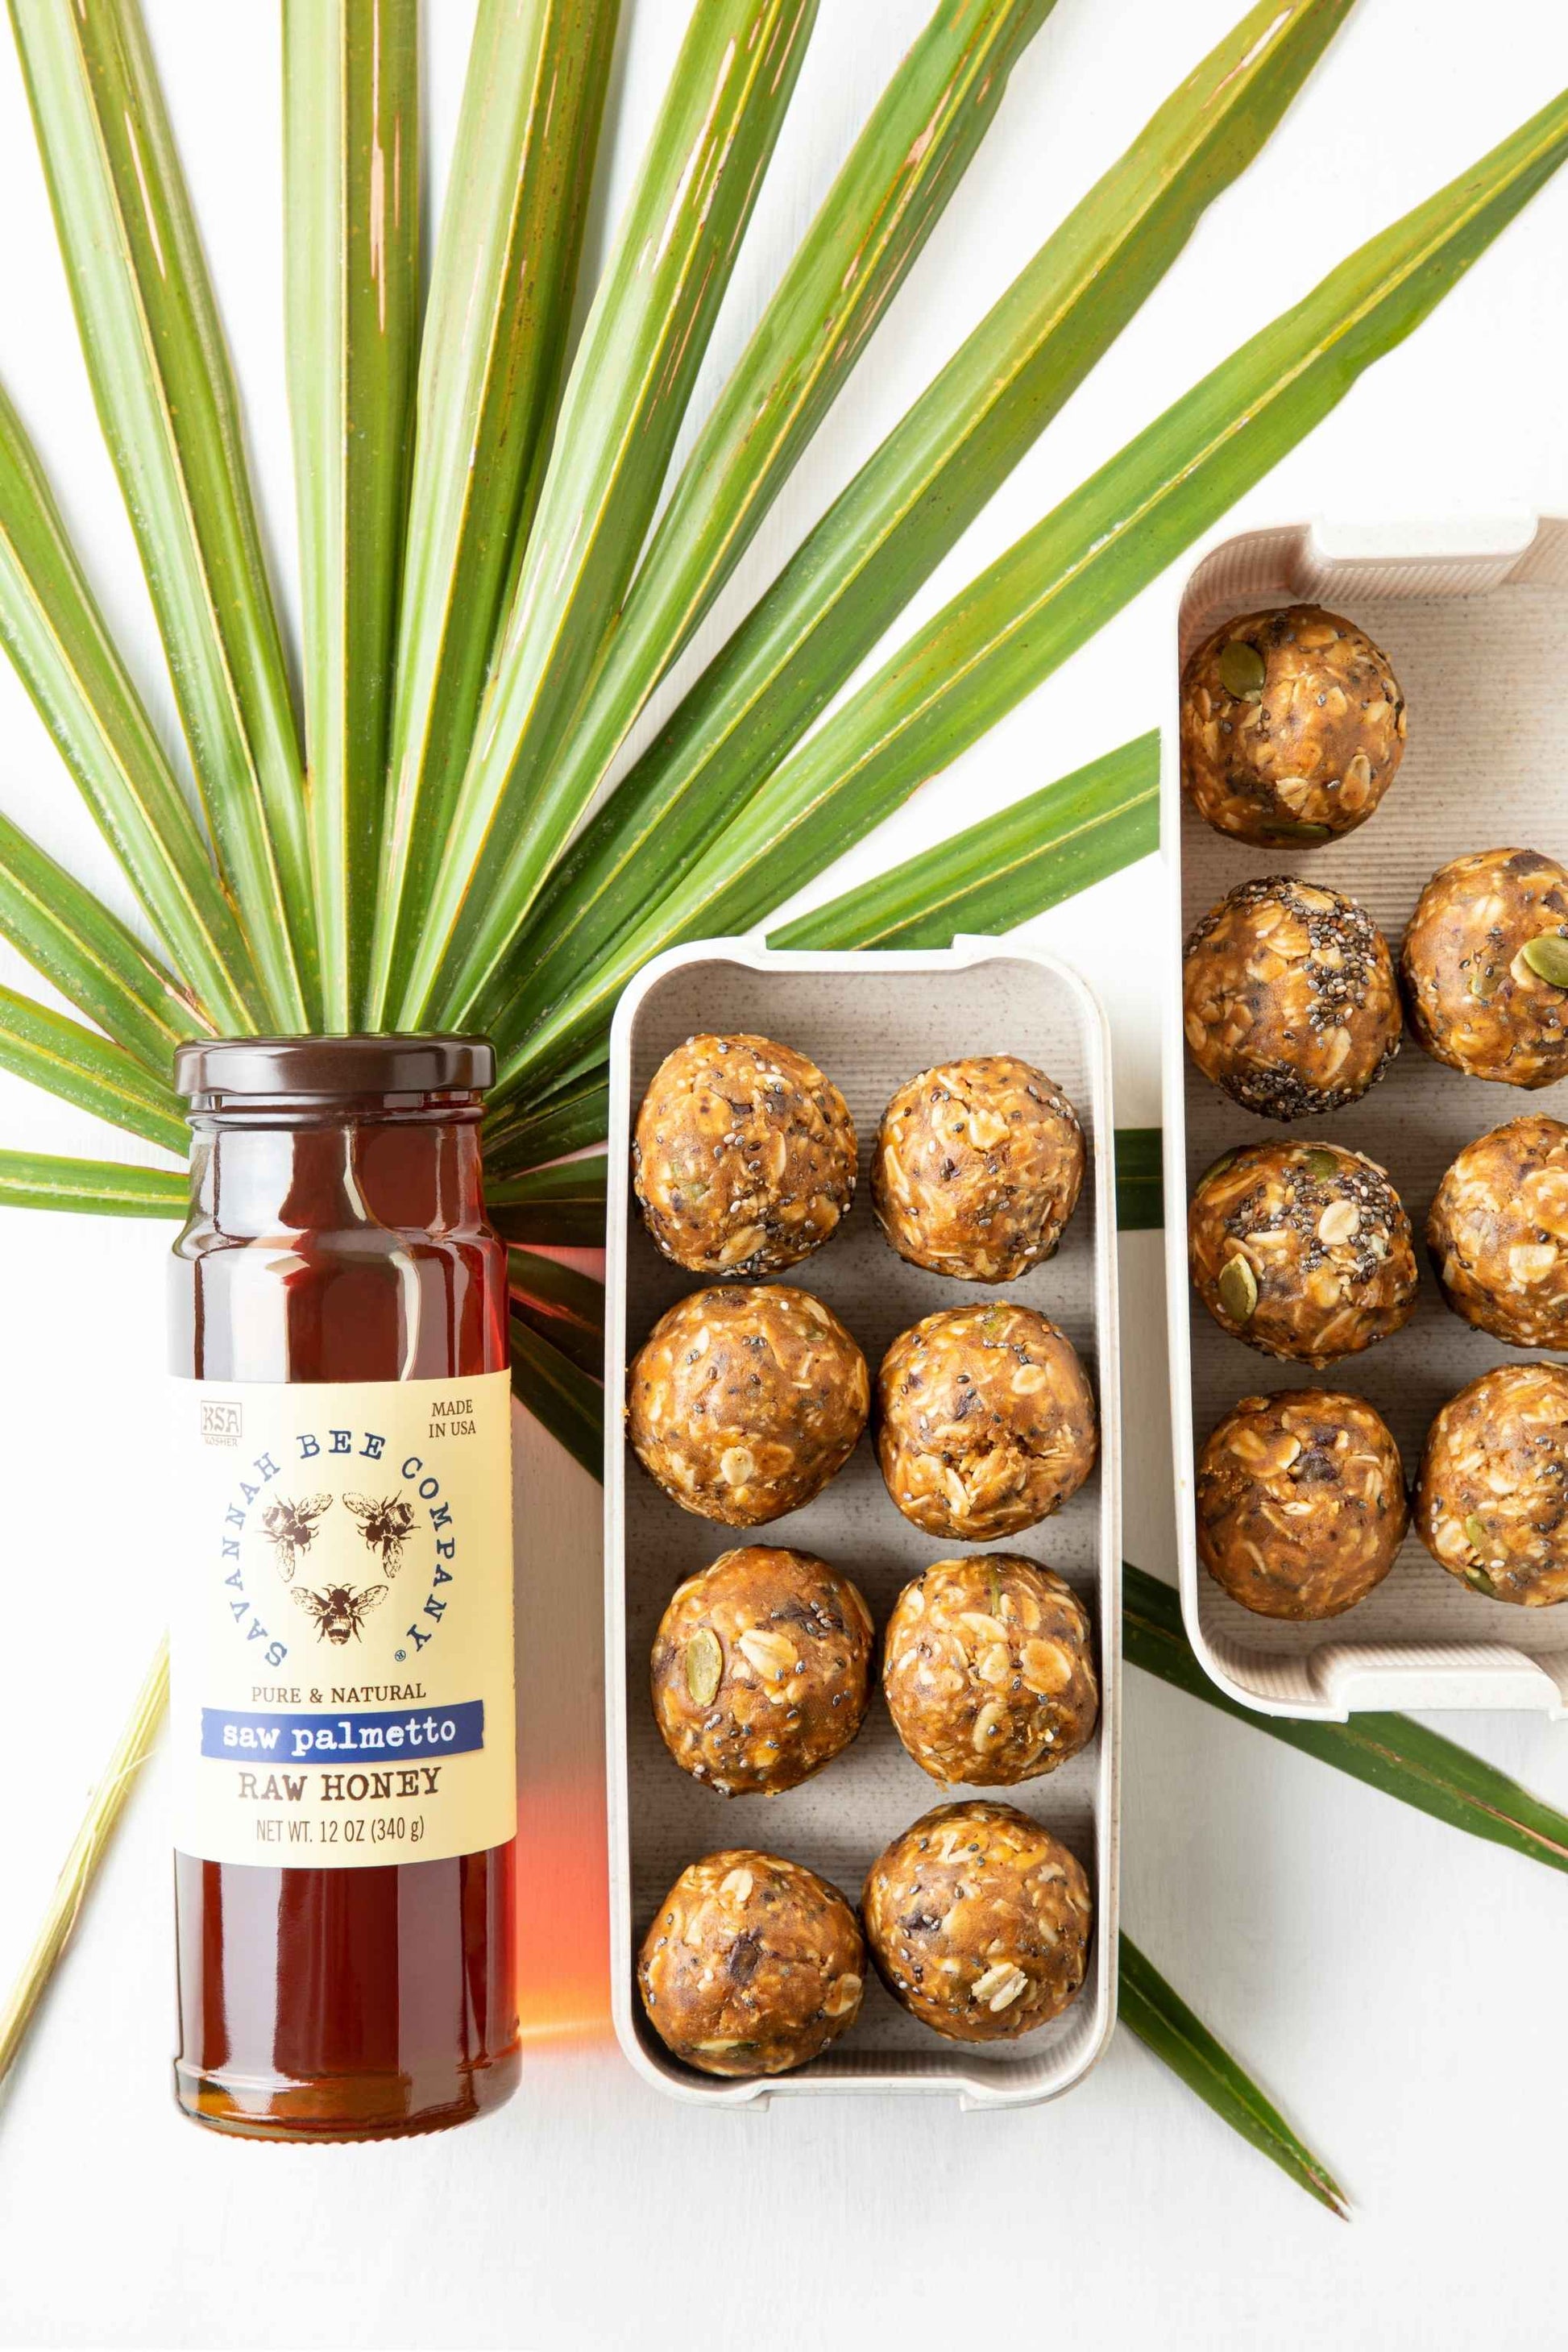 12 ounce Saw Palmetto honey with palmetto branch and two trays of peanut butter power balls. 